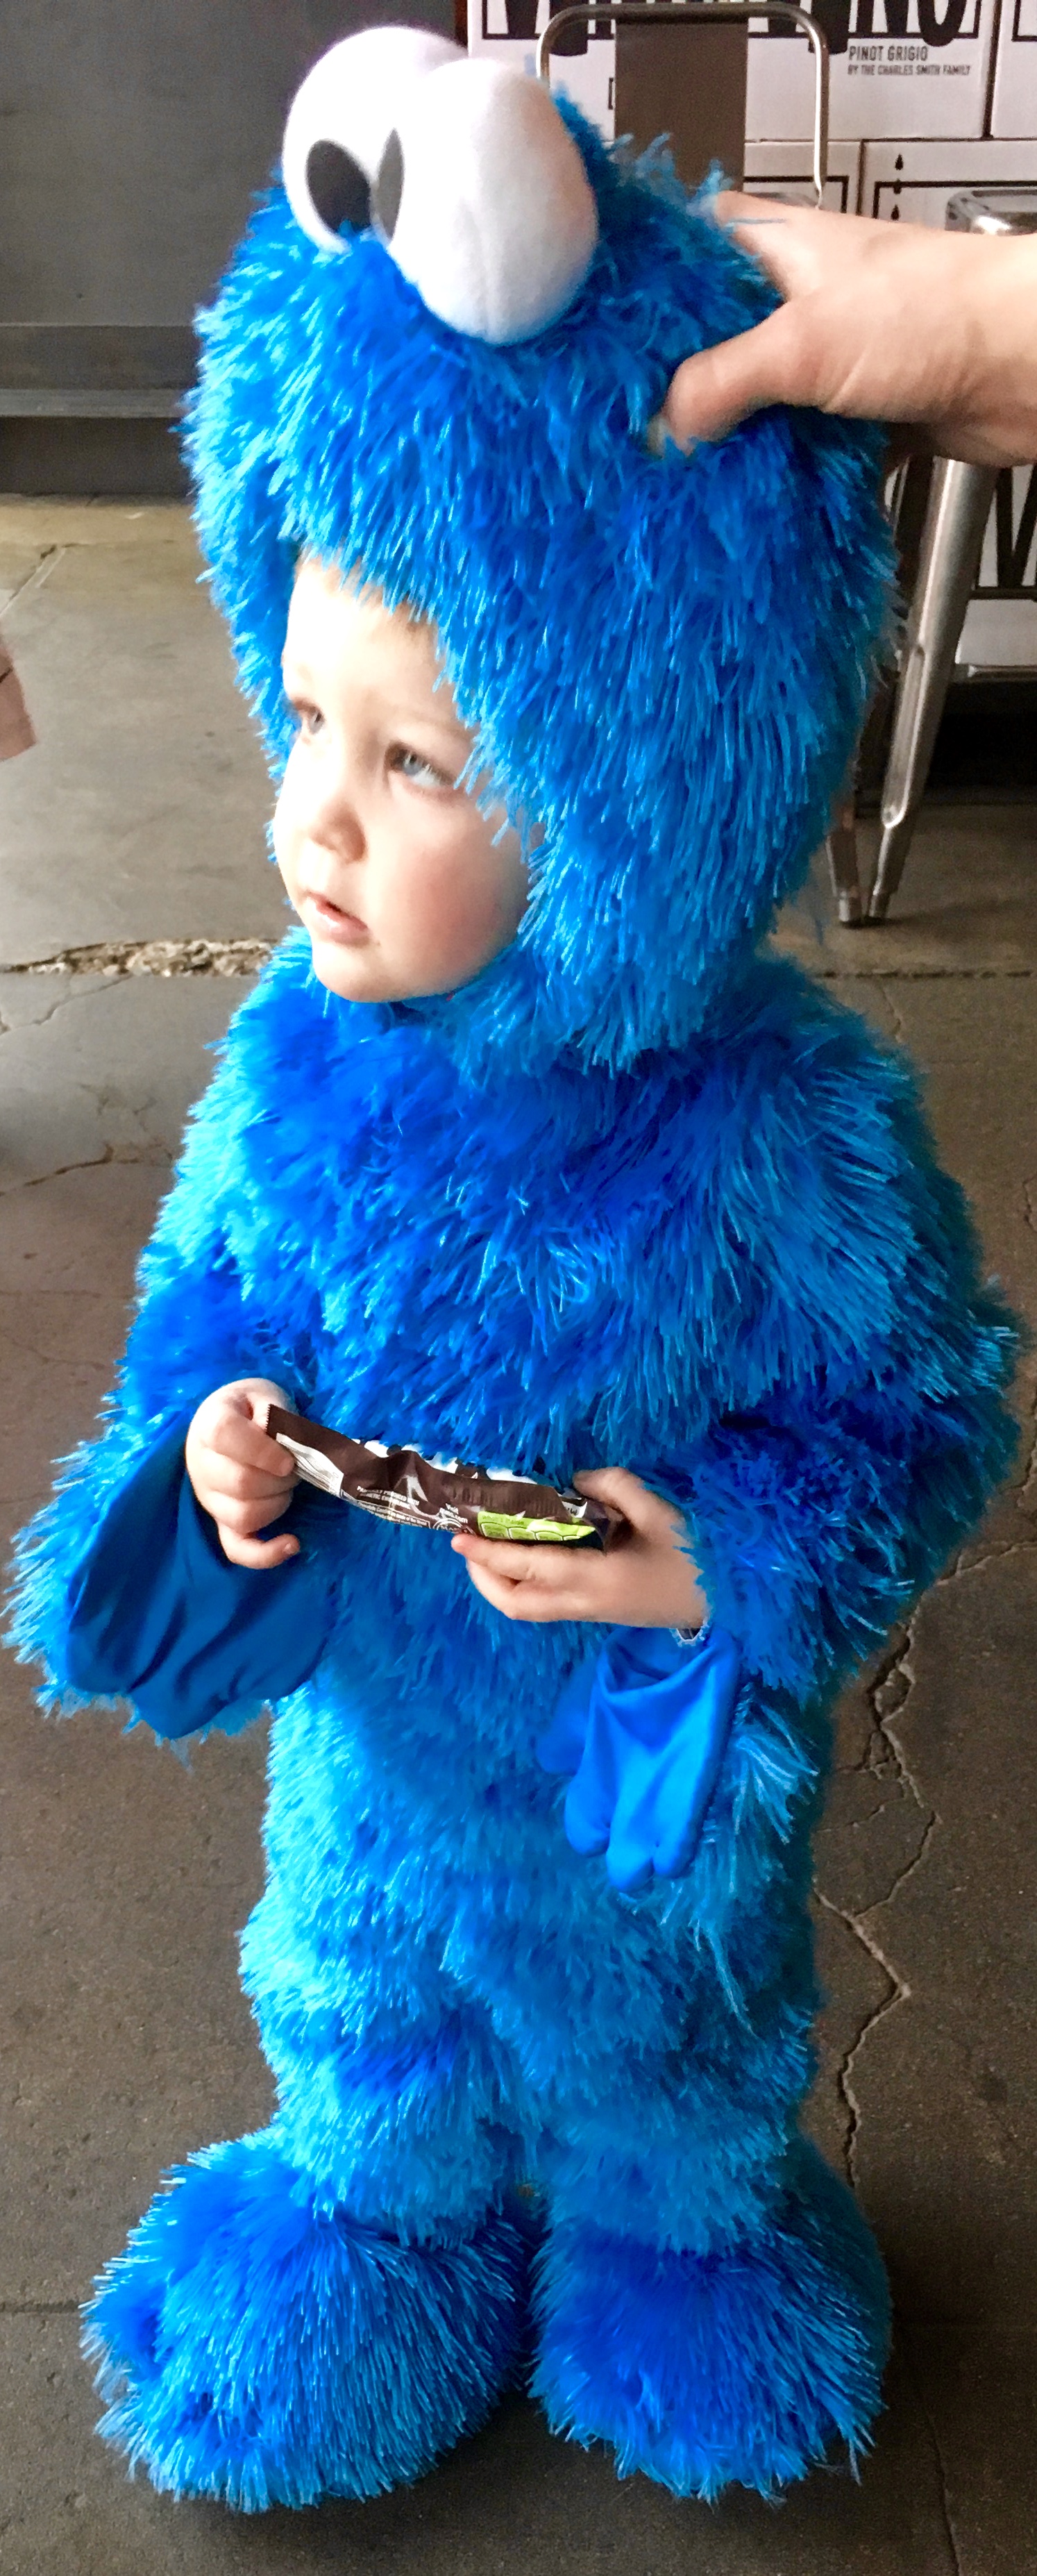 The Cookie Monster!